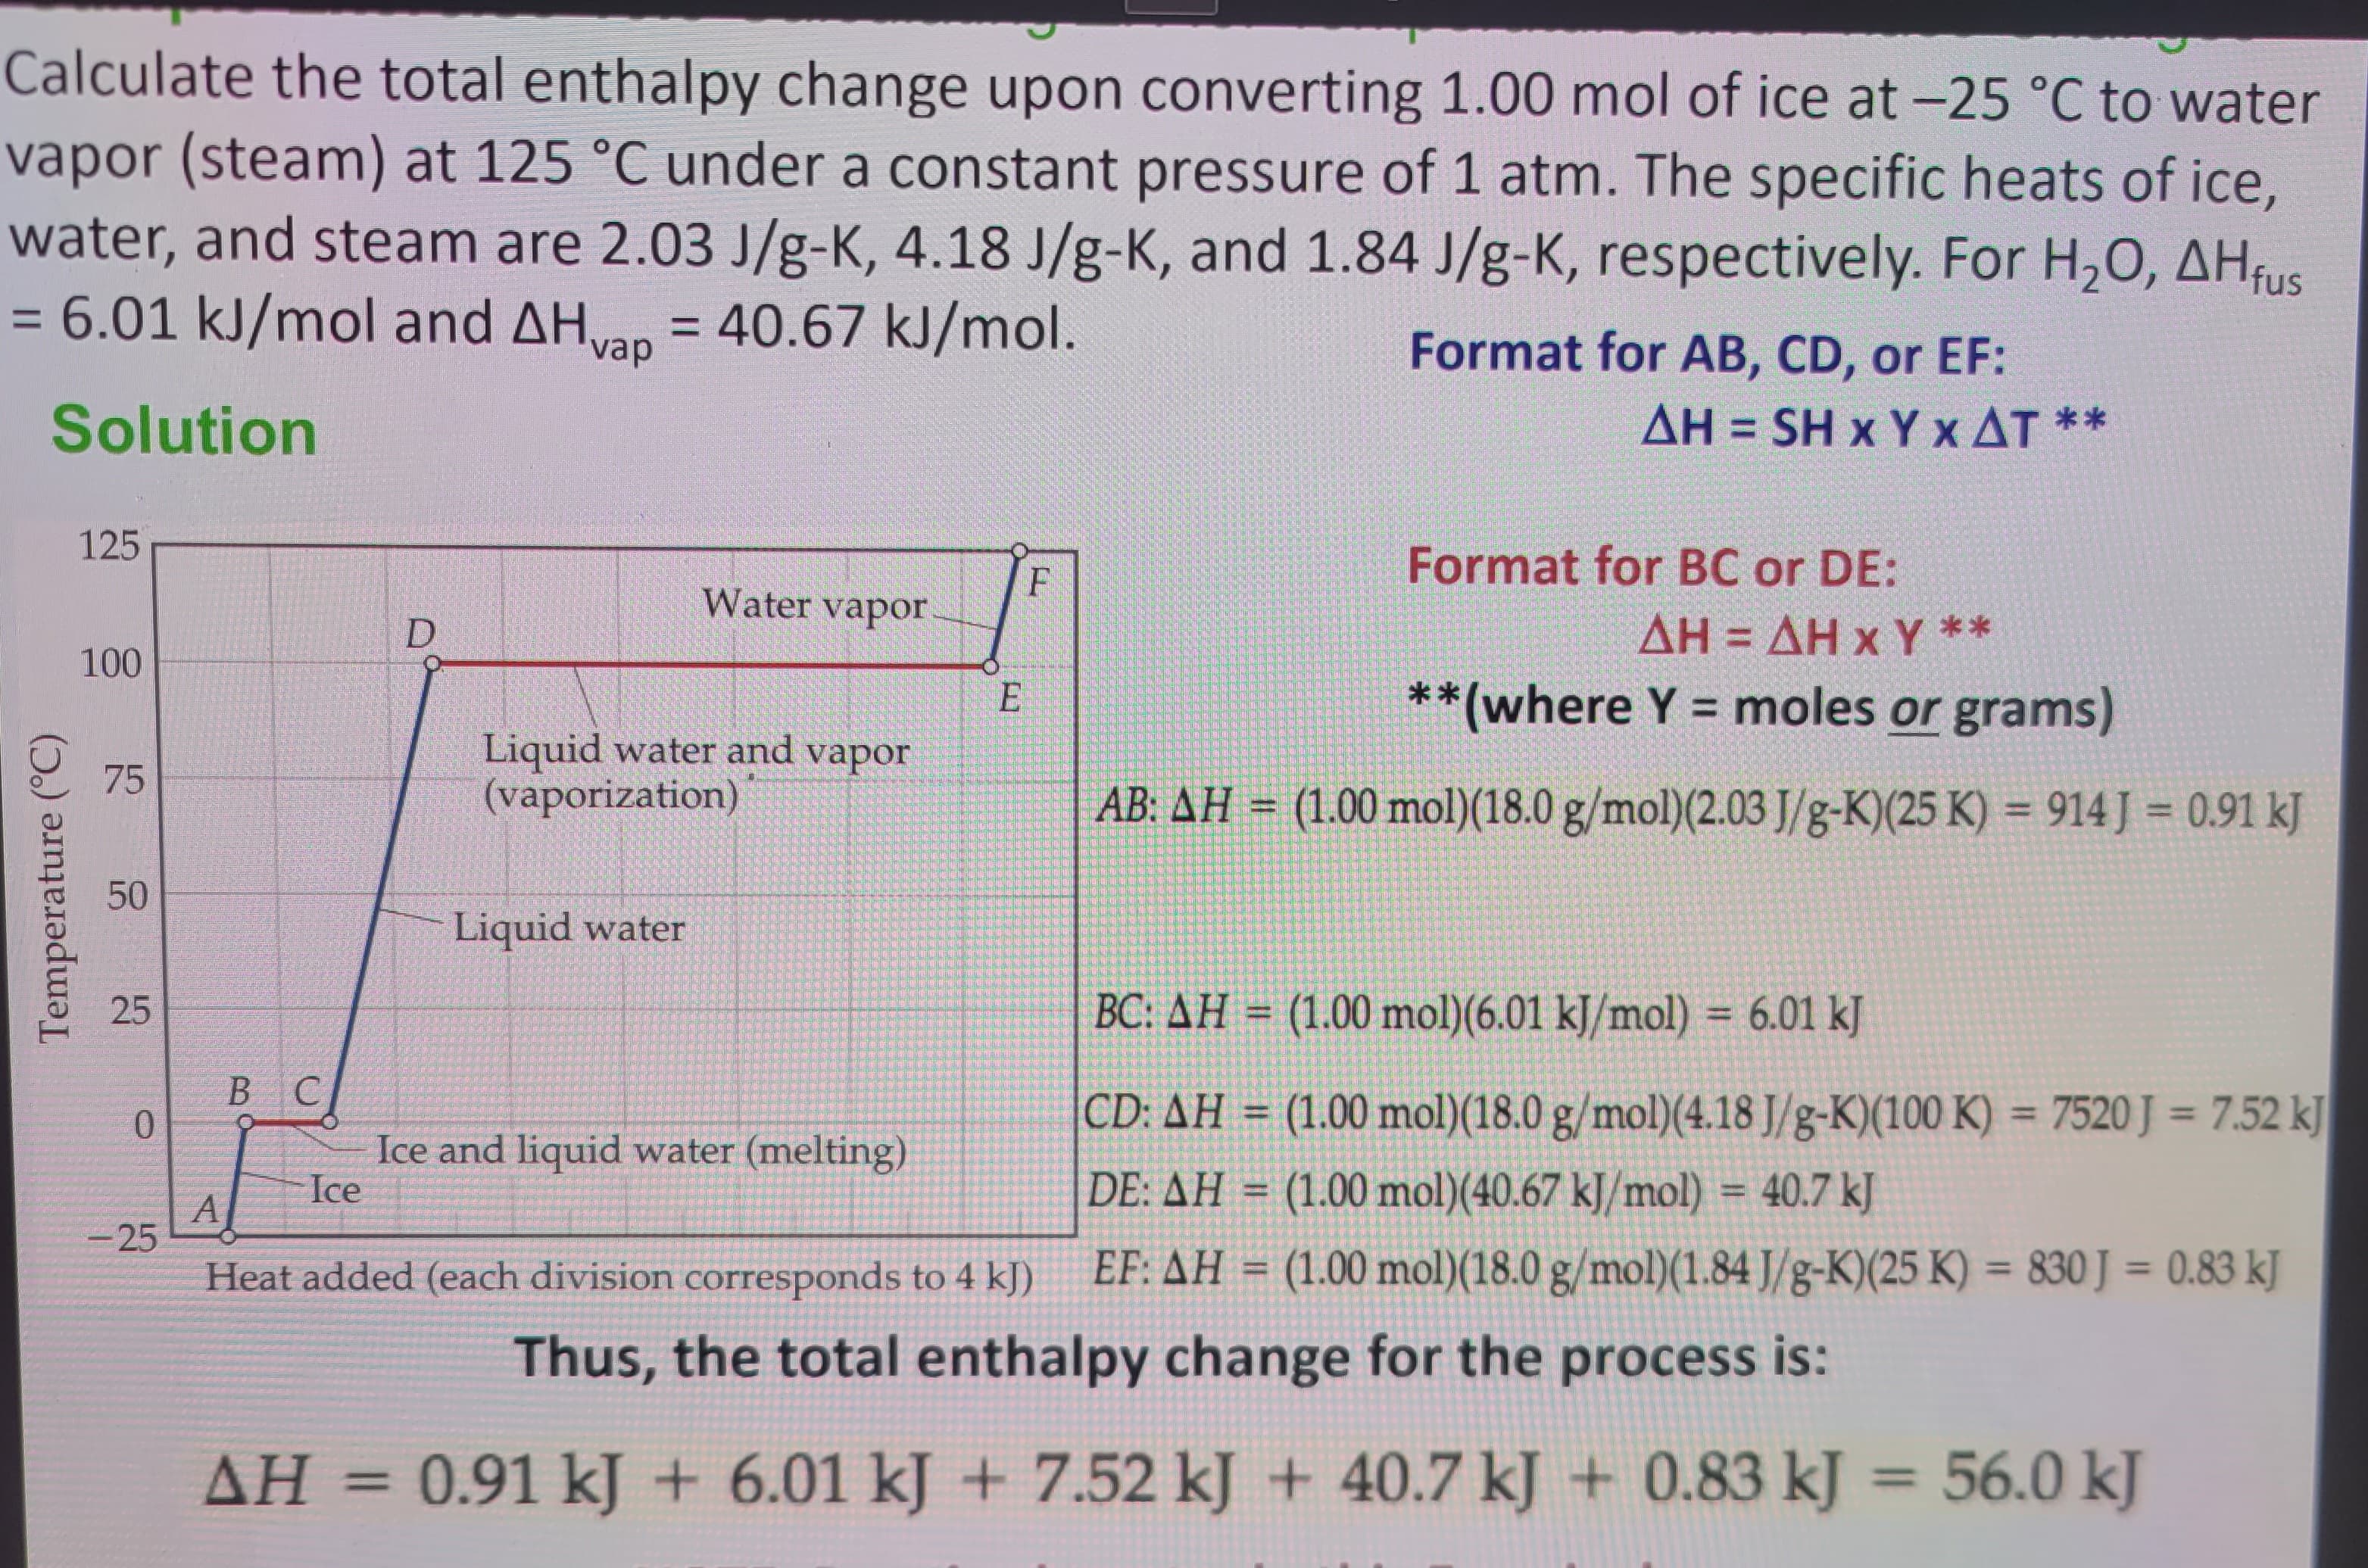 Calculate the total enthalpy change upon converting 1.00 mol of ice at -25 °C to water
vapor (steam) at 125 °C under a constant pressure of 1 atm. The specific heats of ice,
water, and steam are 2.03 J/g-K, 4.18 J/g-K, and 1.84 J/g-K, respectively. For H₂O, AHfus
= 6.01 kJ/mol and AHvap = 40.67 kJ/mol.
Solution
125
Format for AB, CD, or EF:
AH = SH x Y x AT **
100
Temperature (°C)
75
25
50
50
D
Format for BC or DE:
F
Water vapor
AH = AH x Y**
E
Liquid water and vapor
(vaporization)
Liquid water
**(where Y = moles or grams)
AB: AH (1.00 mol)(18.0 g/mol) (2.03 J/g-K)(25 K) = 914 J = 0.91 kJ
25
25
B C
0
A
-25
Ice and liquid water (melting)
Ice
BC: AH (1.00 mol)(6.01 kJ/mol) = 6.01 kJ
CD: AH (1.00 mol)(18.0 g/mol)(4.18 J/g-K)(100 K) = 7520 J = 7.52 kJ
DE: AH = (1.00 mol)(40.67 kJ/mol) = 40.7 kJ
Heat added (each division corresponds to 4 kJ)
Thus, the total enthalpy change for the process is:
EF: AH (1.00 mol)(18.0 g/mol)(1.84 J/g-K)(25 K) = 830 J = 0.83 kJ
AH =
0.91 kJ + 6.01 kJ + 7.52 kJ + 40.7 kJ + 0.83 kJ = 56.0 kJ